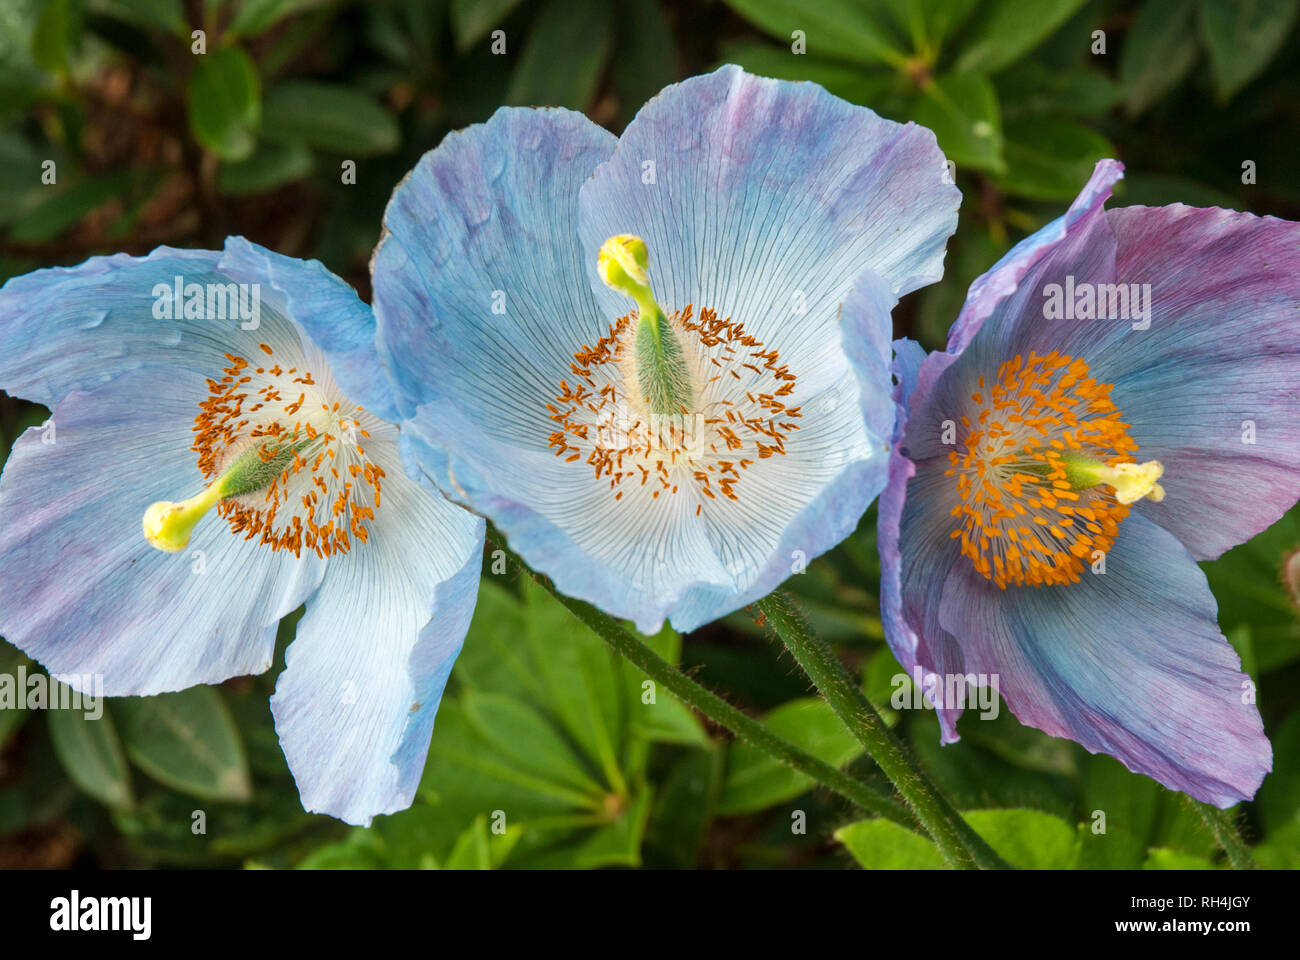 Three delicate flowers of the Himalayan Blue Poppy with variegated colouring from  pale blue to pink/ purple and contrasting bright orange stamen. Stock Photo